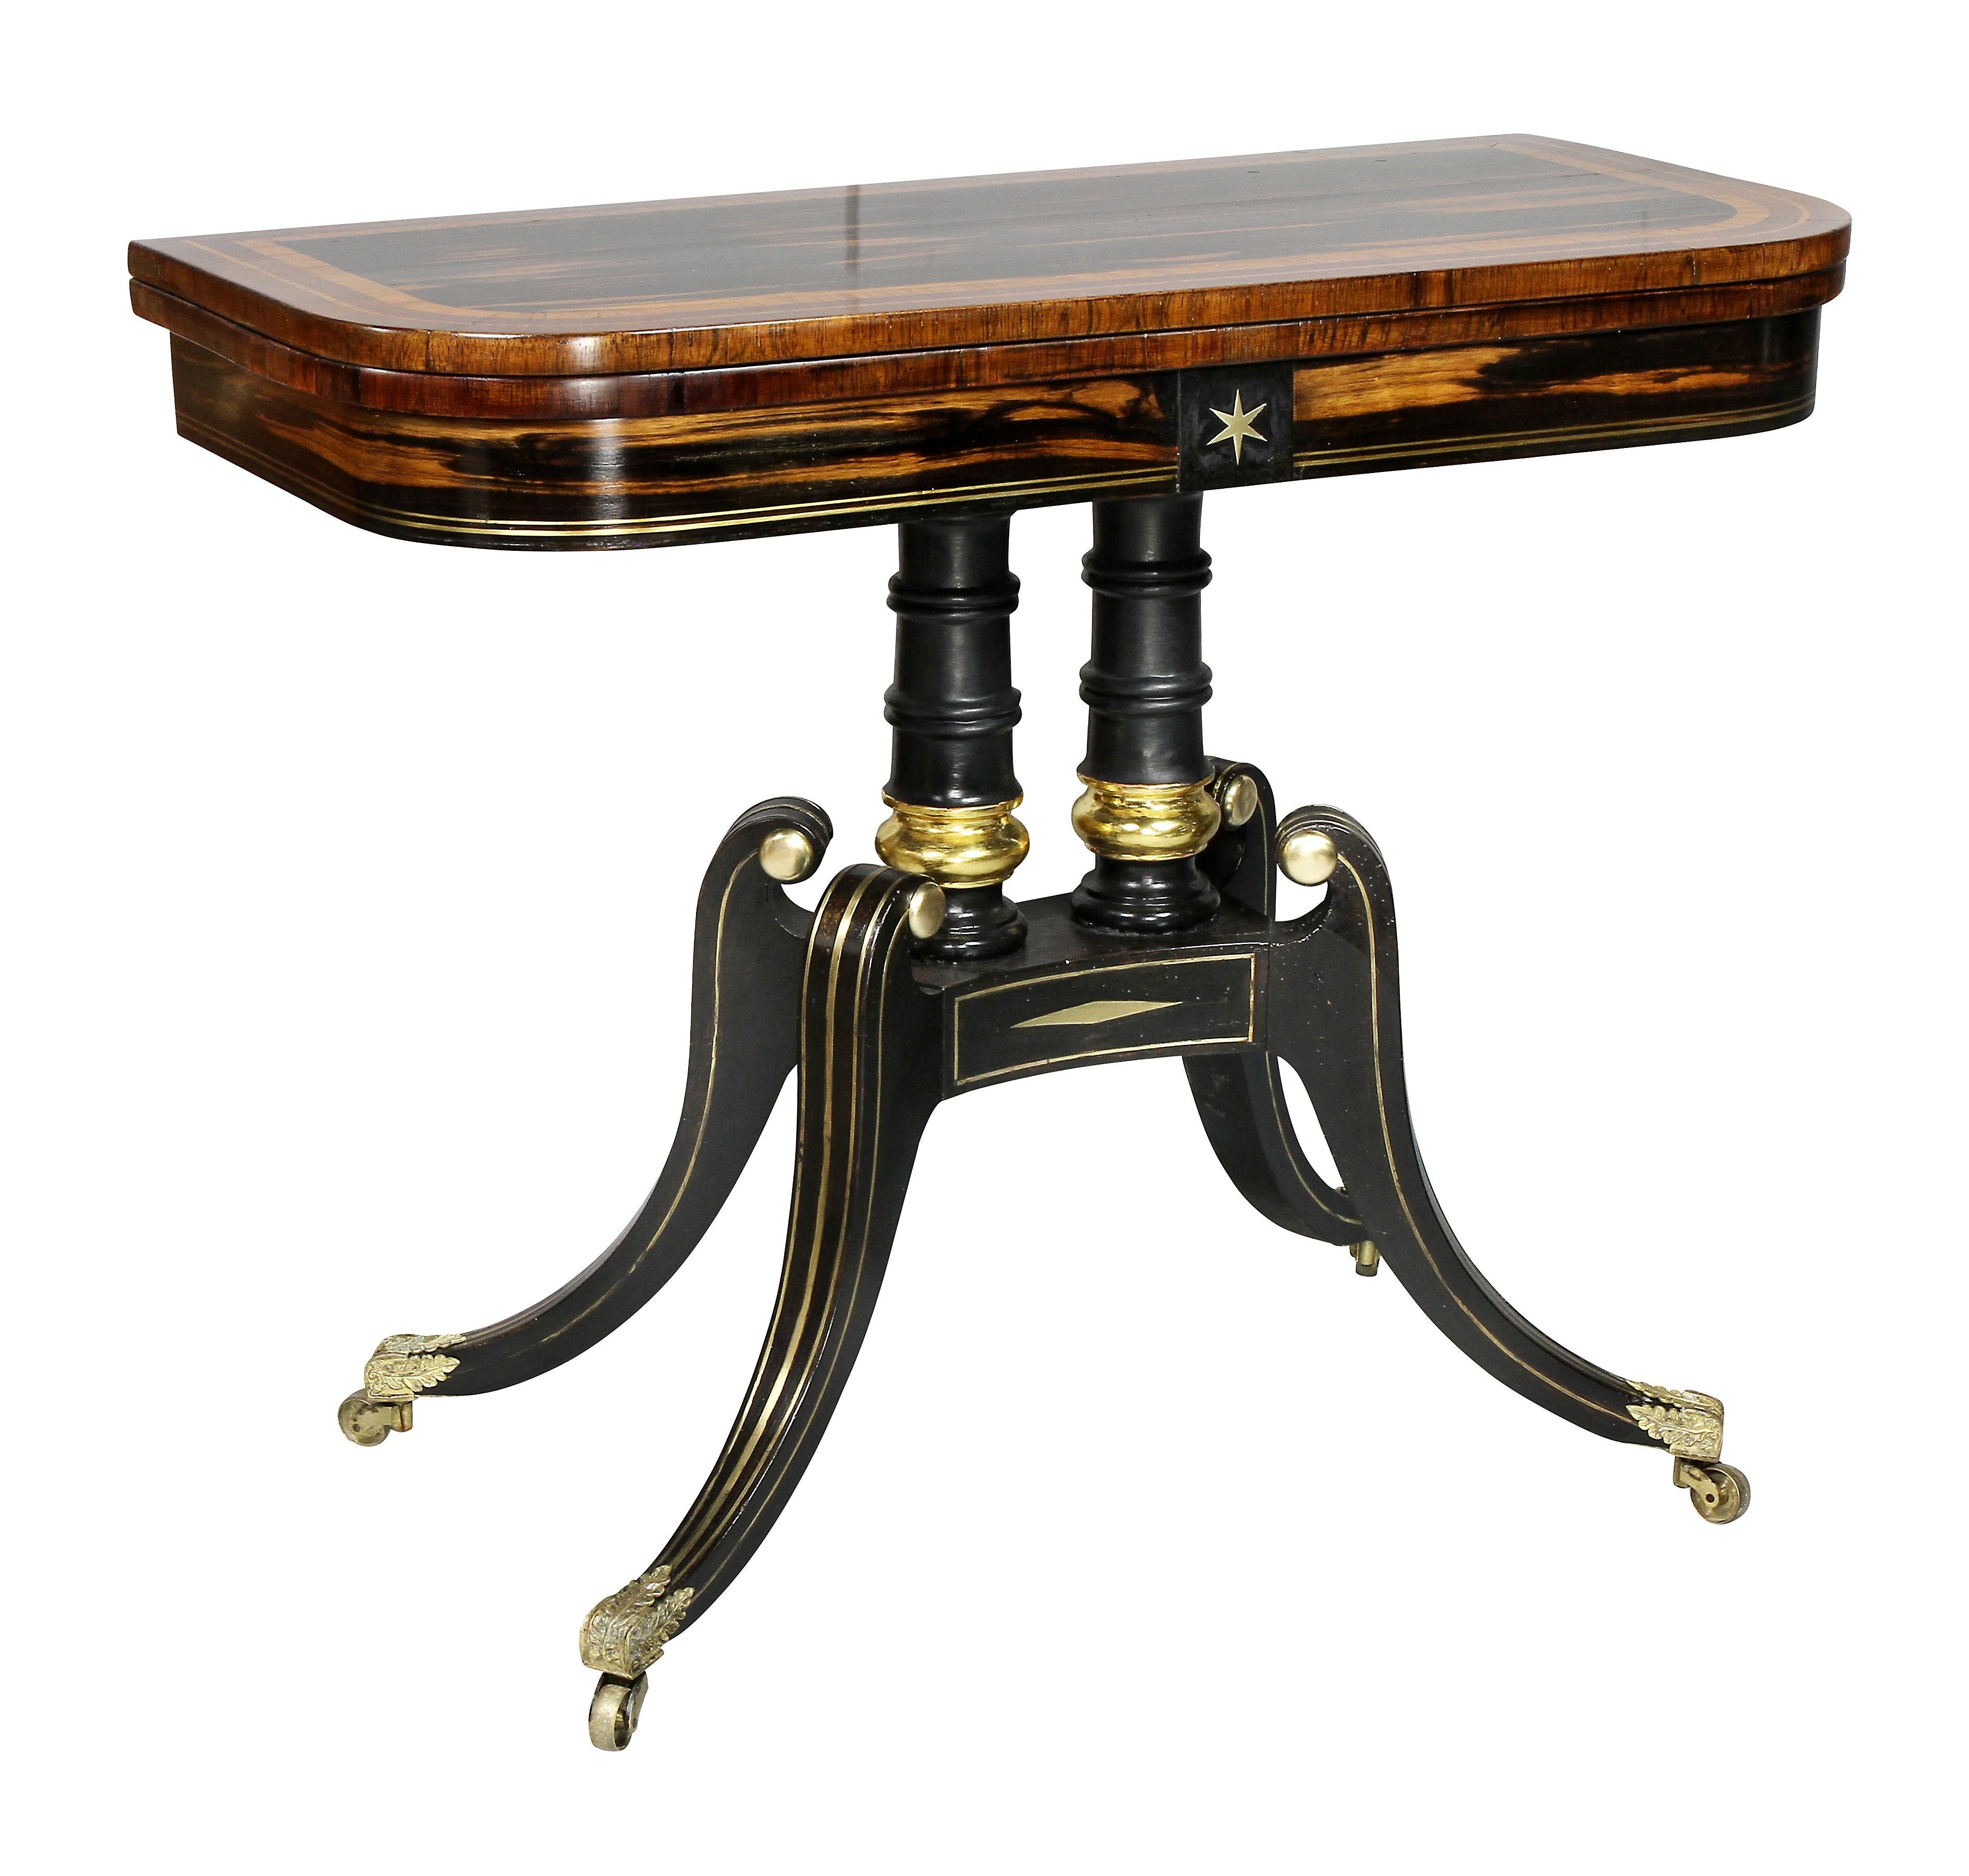 Each with a hinged rectangular top with rounded corners and satinwood inner banding, opening to a leather lined playing surface, over a frieze with central inset brass star, over two turned ebonized and gilt supports raised on four brass inlaid